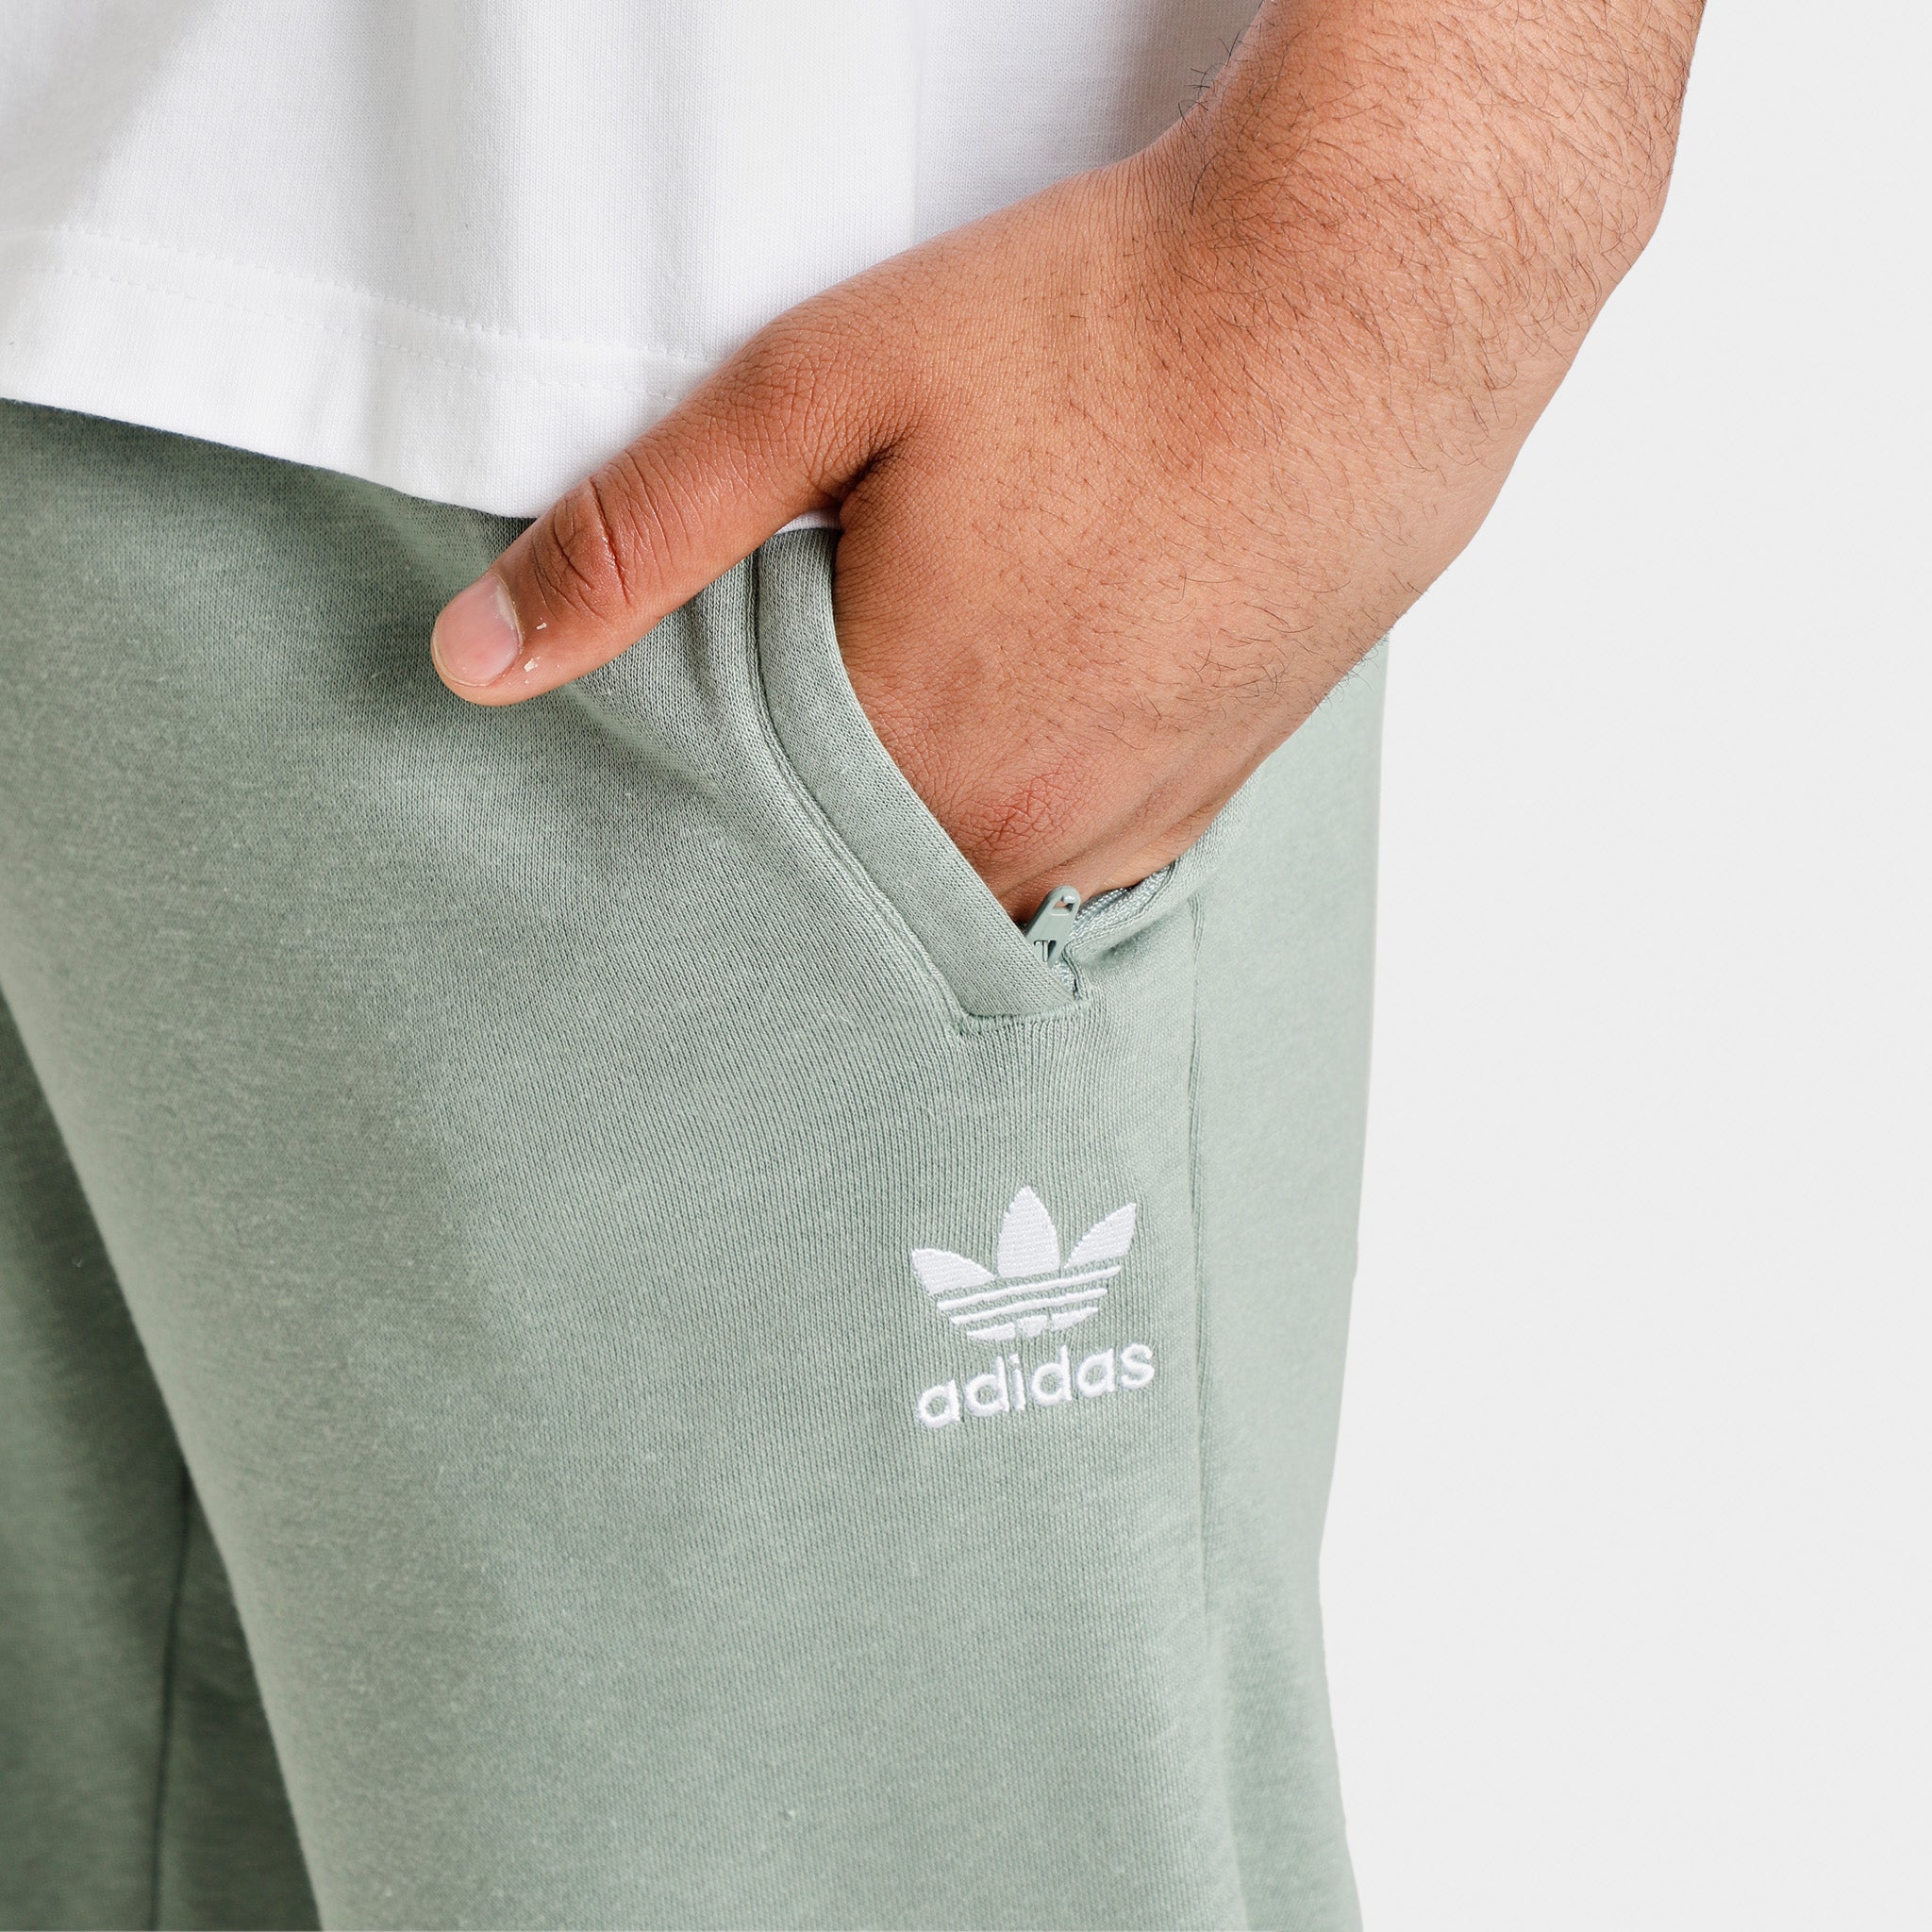 the Essentials+ for / usd Hemp Silver at adidas Online 42.00 Green Only Shop with Pants Made Originals